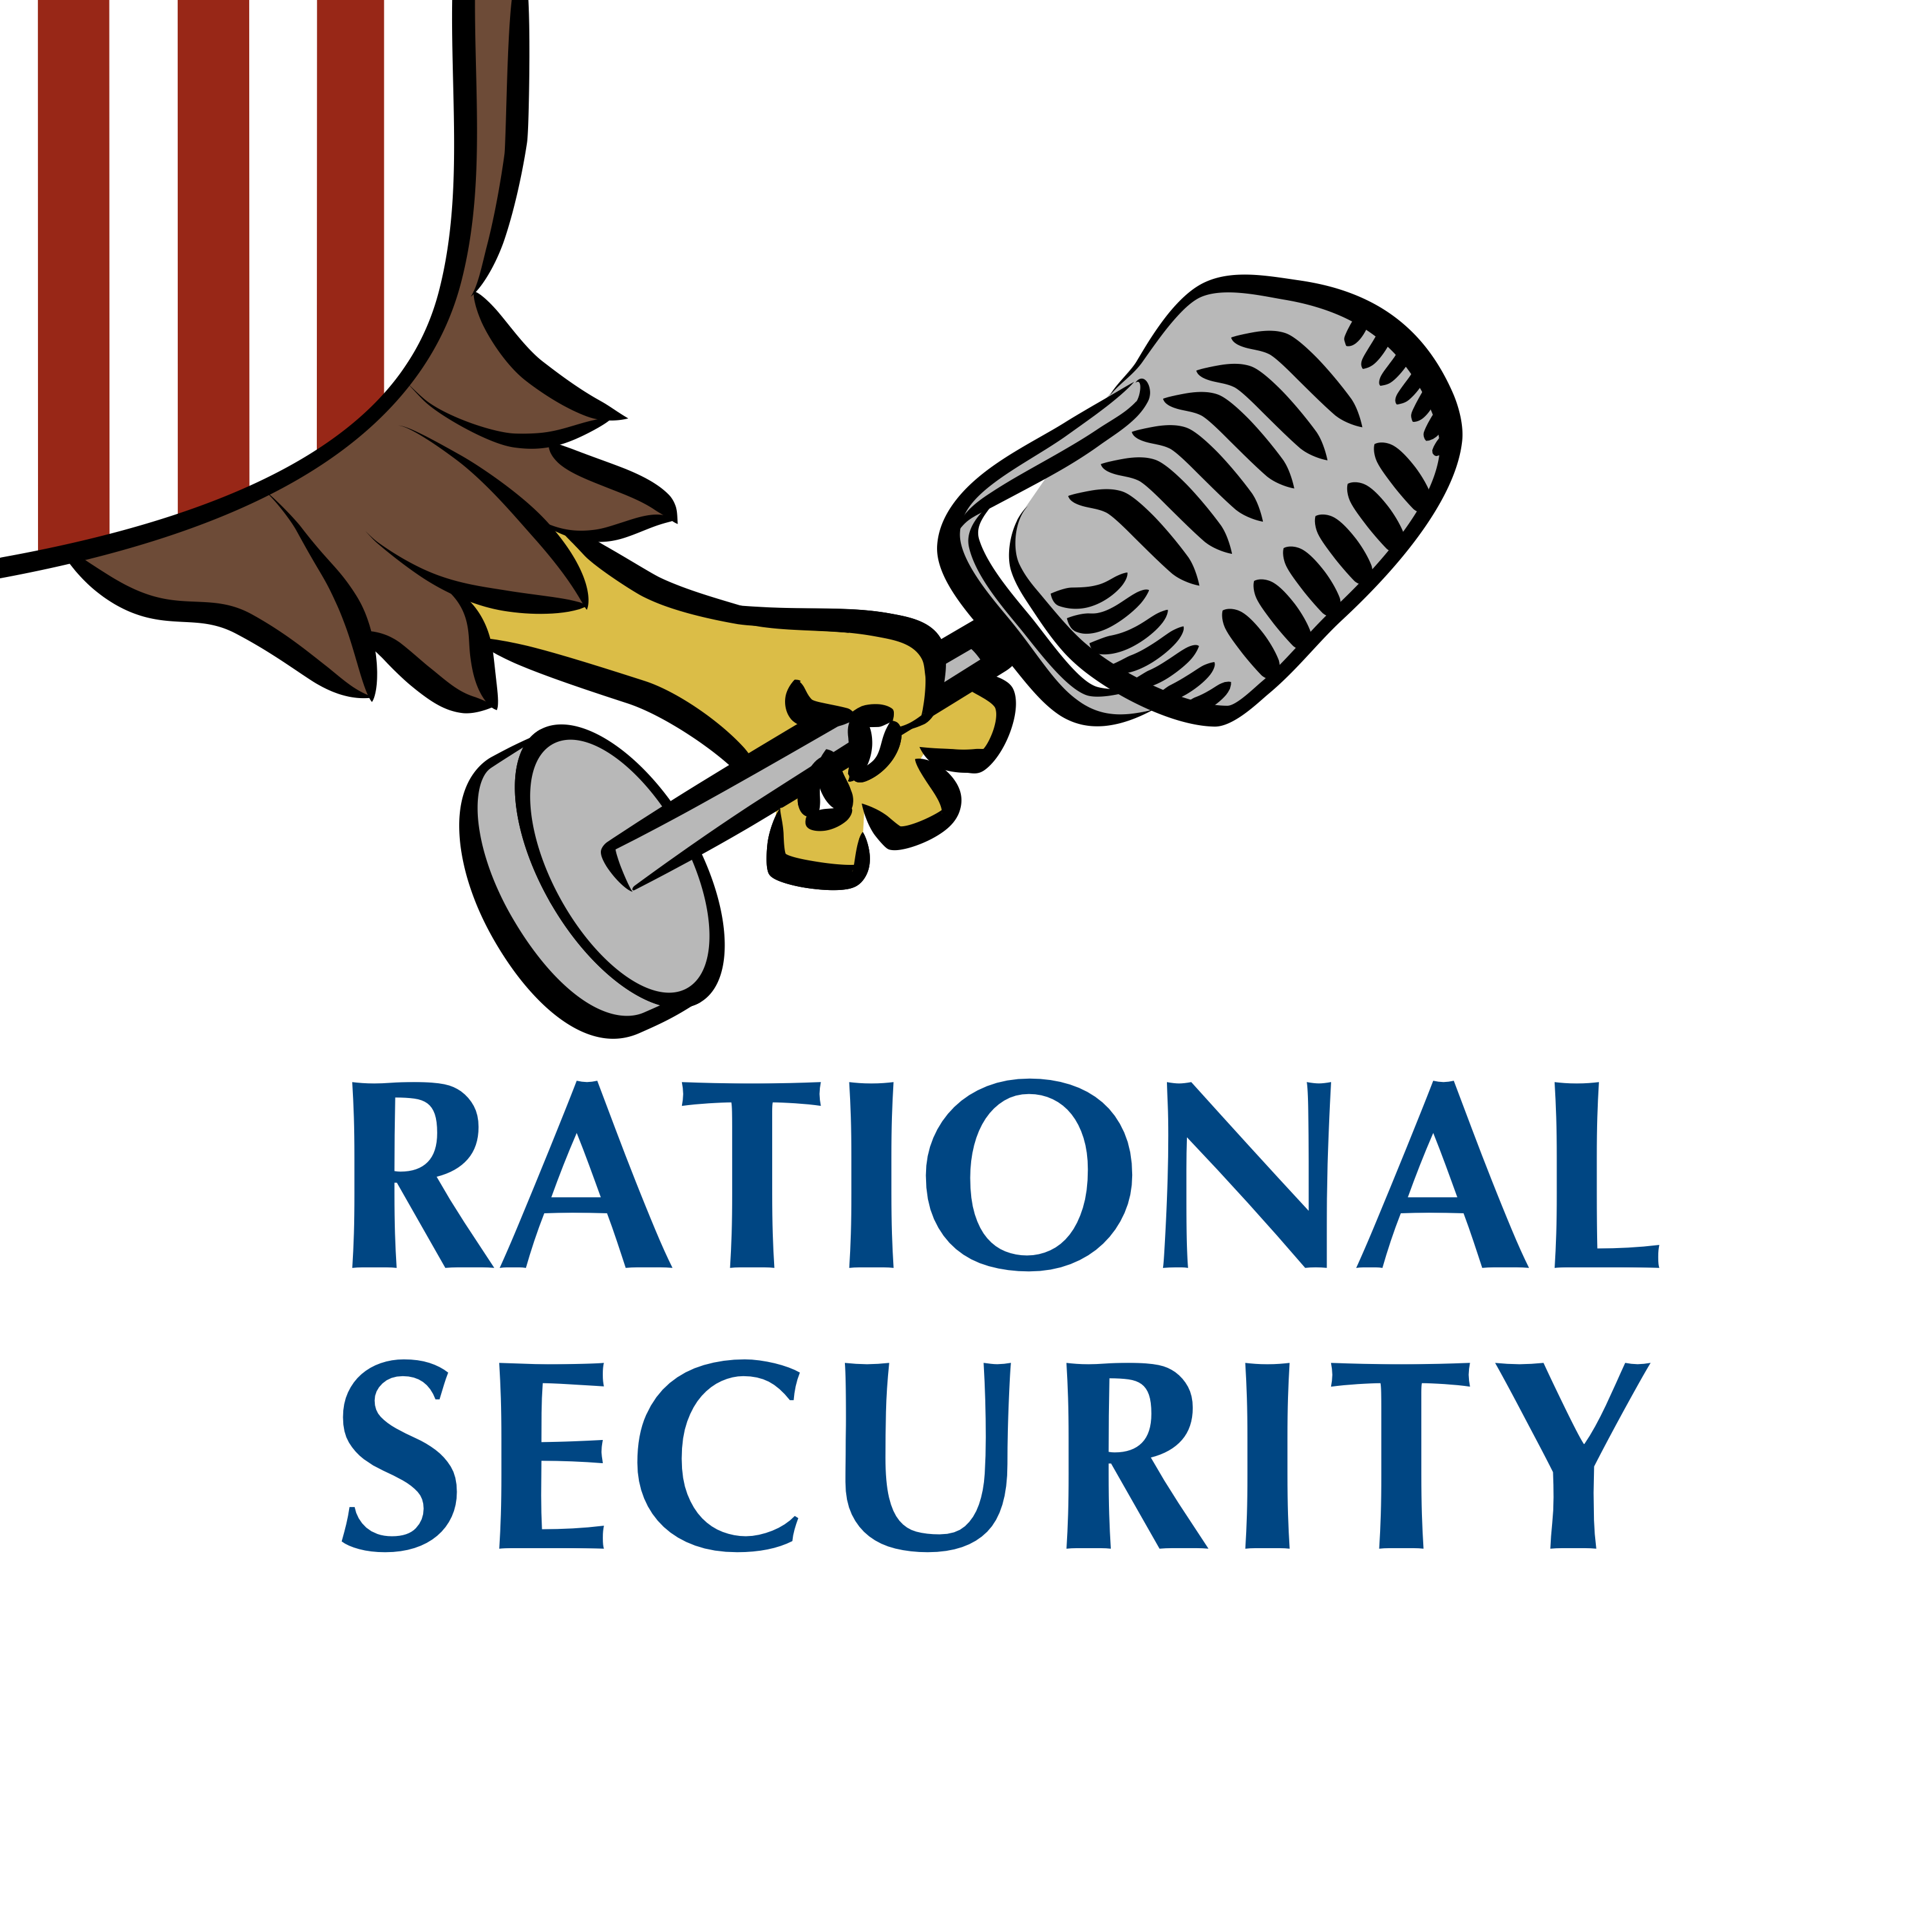 Rational Security